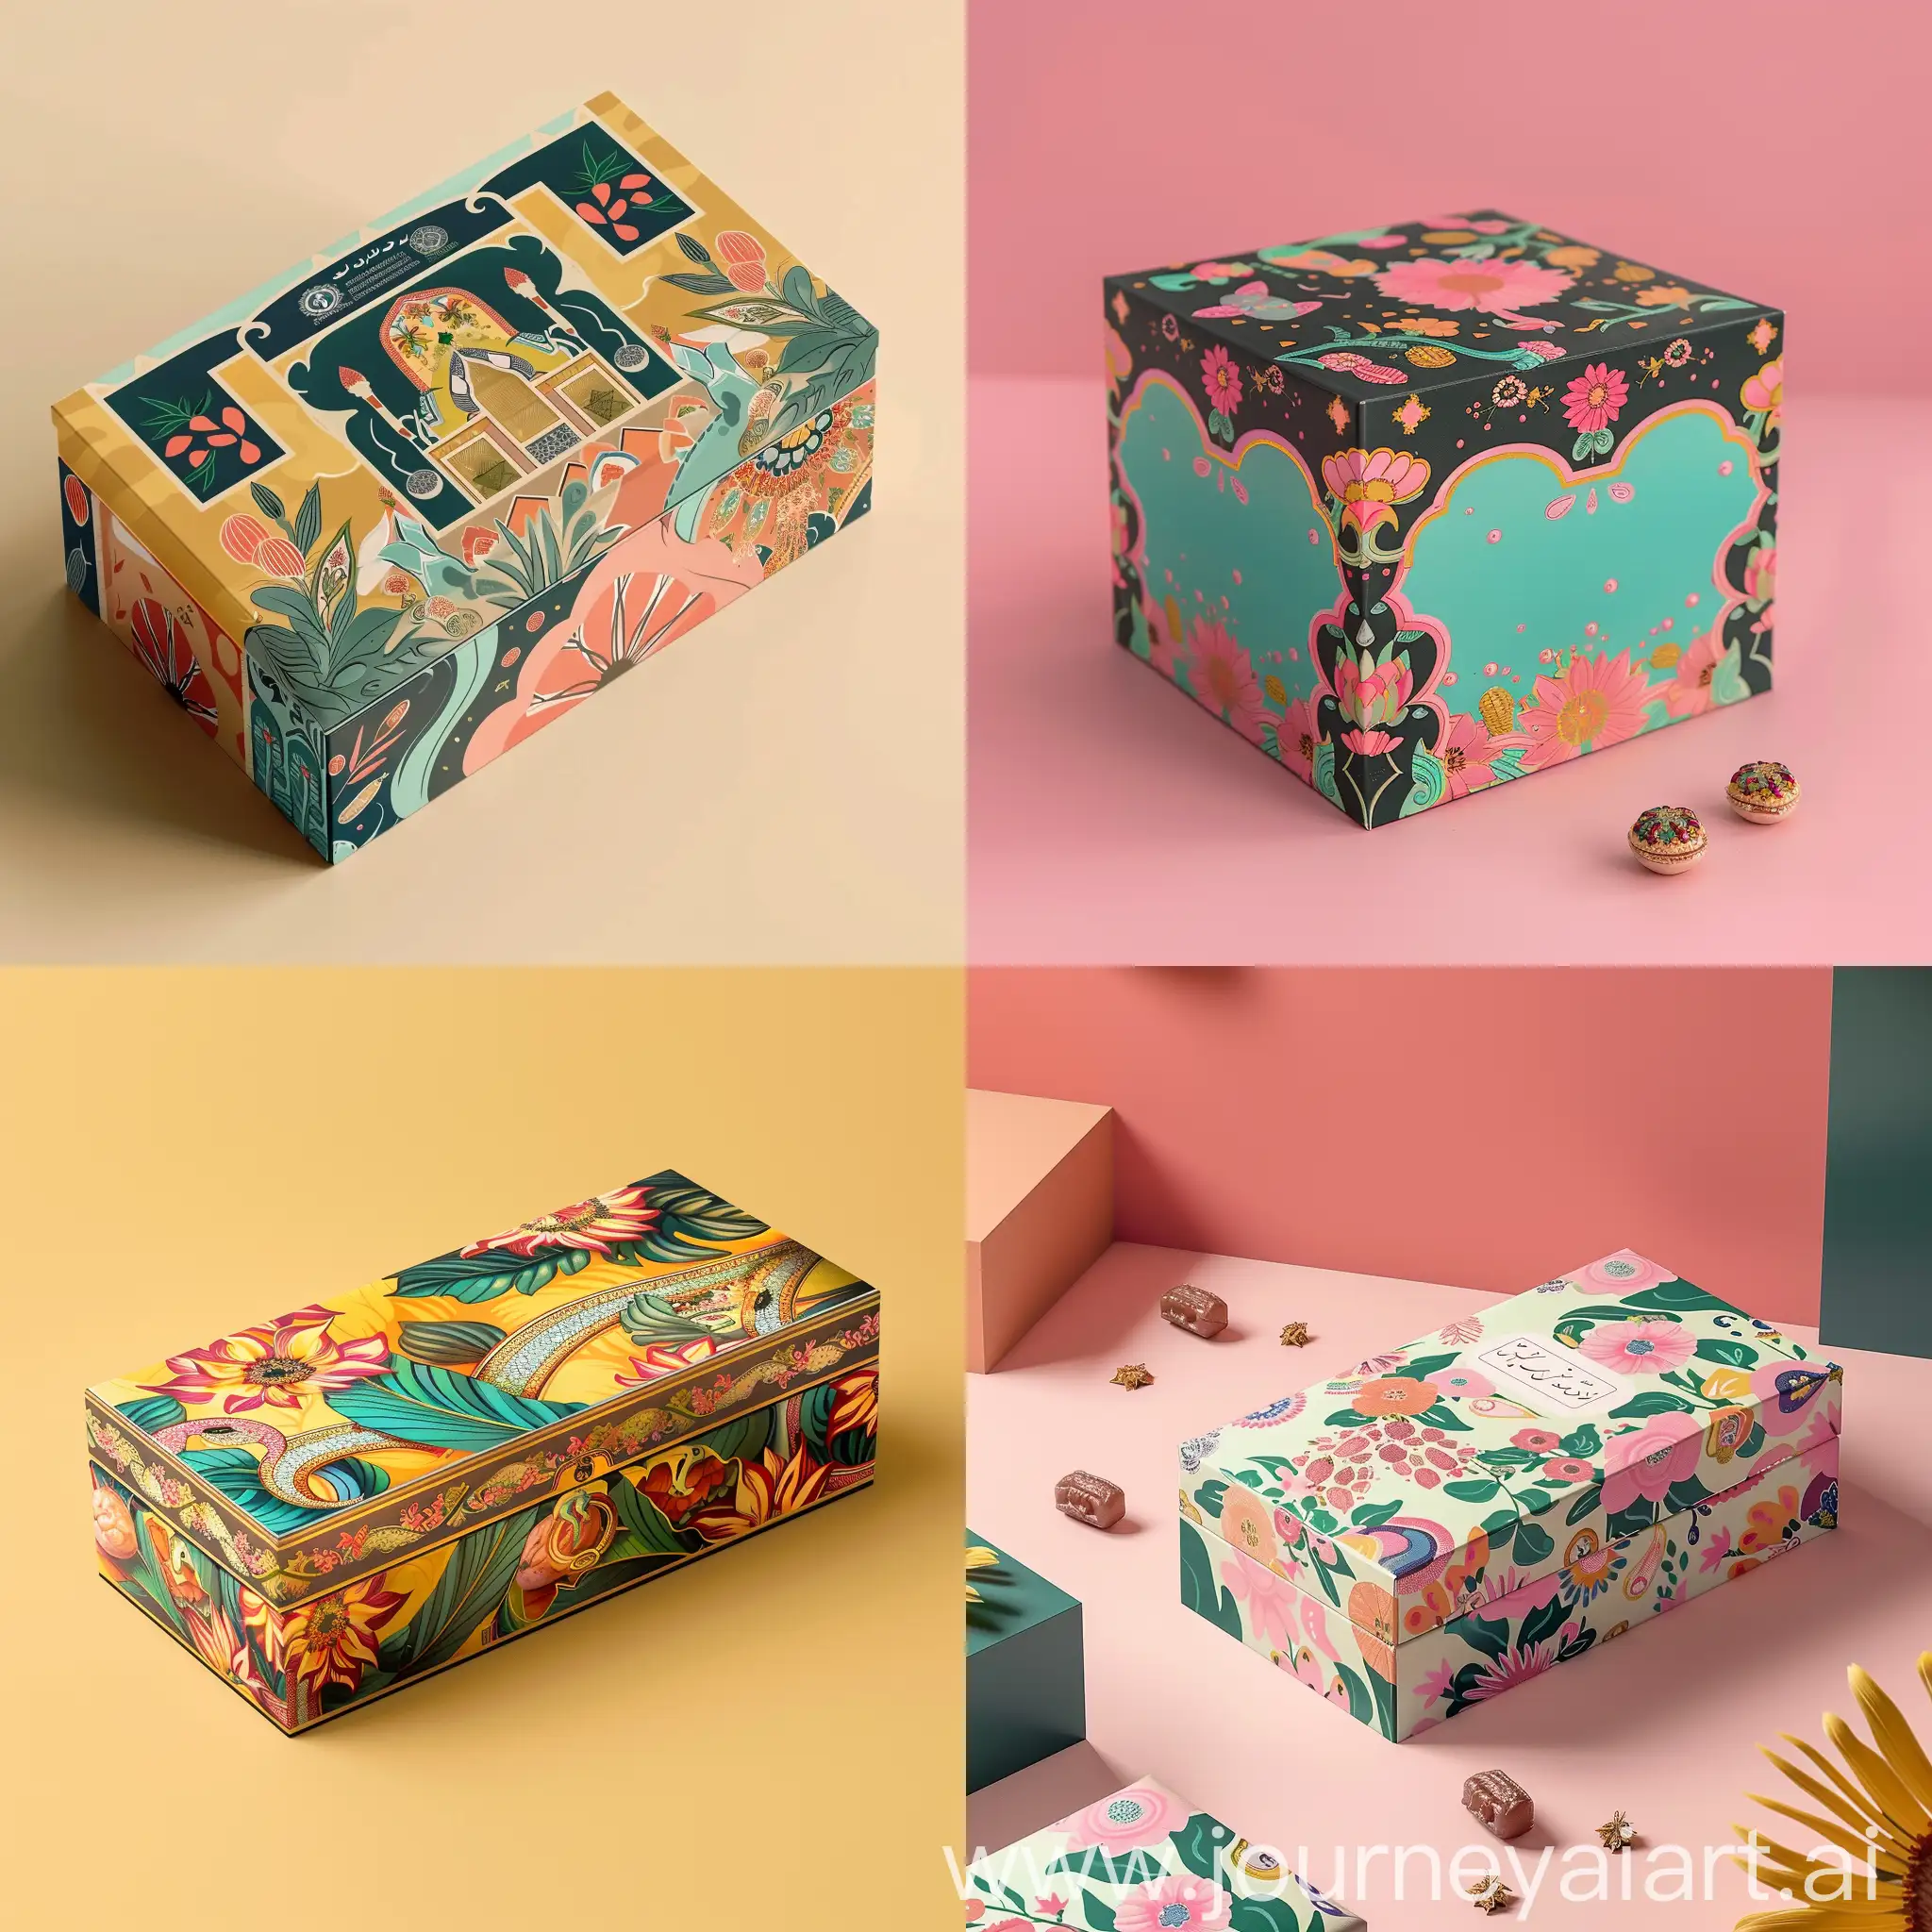 Iranian-Culture-Inspired-Date-Box-Packaging-with-Slimy-Motifs